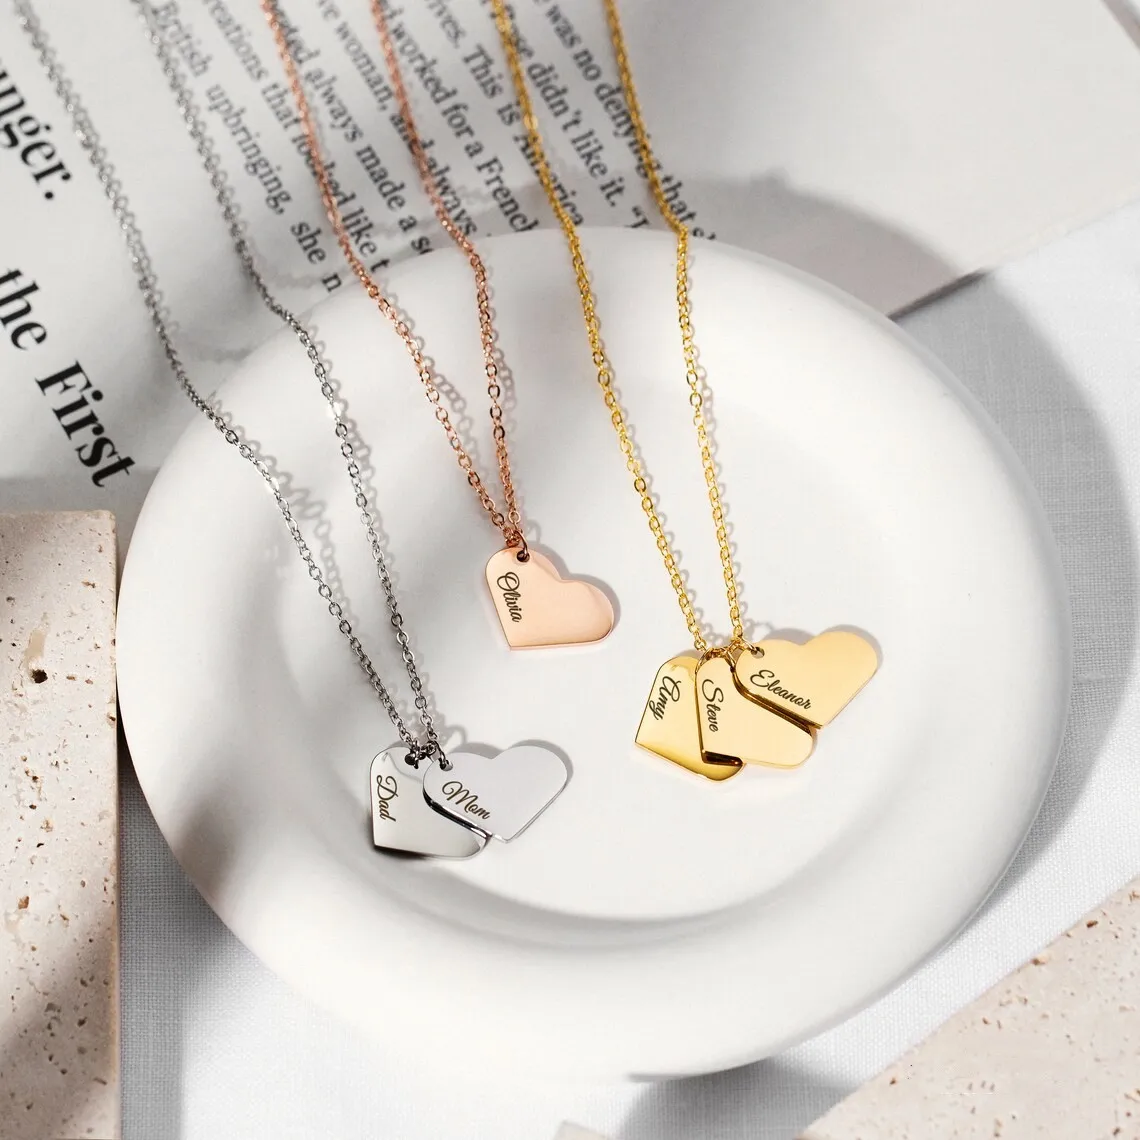 Heart Personalized Name Necklace For Women Gifts Women's Neck Chain Necklaces Fashion Jewelry